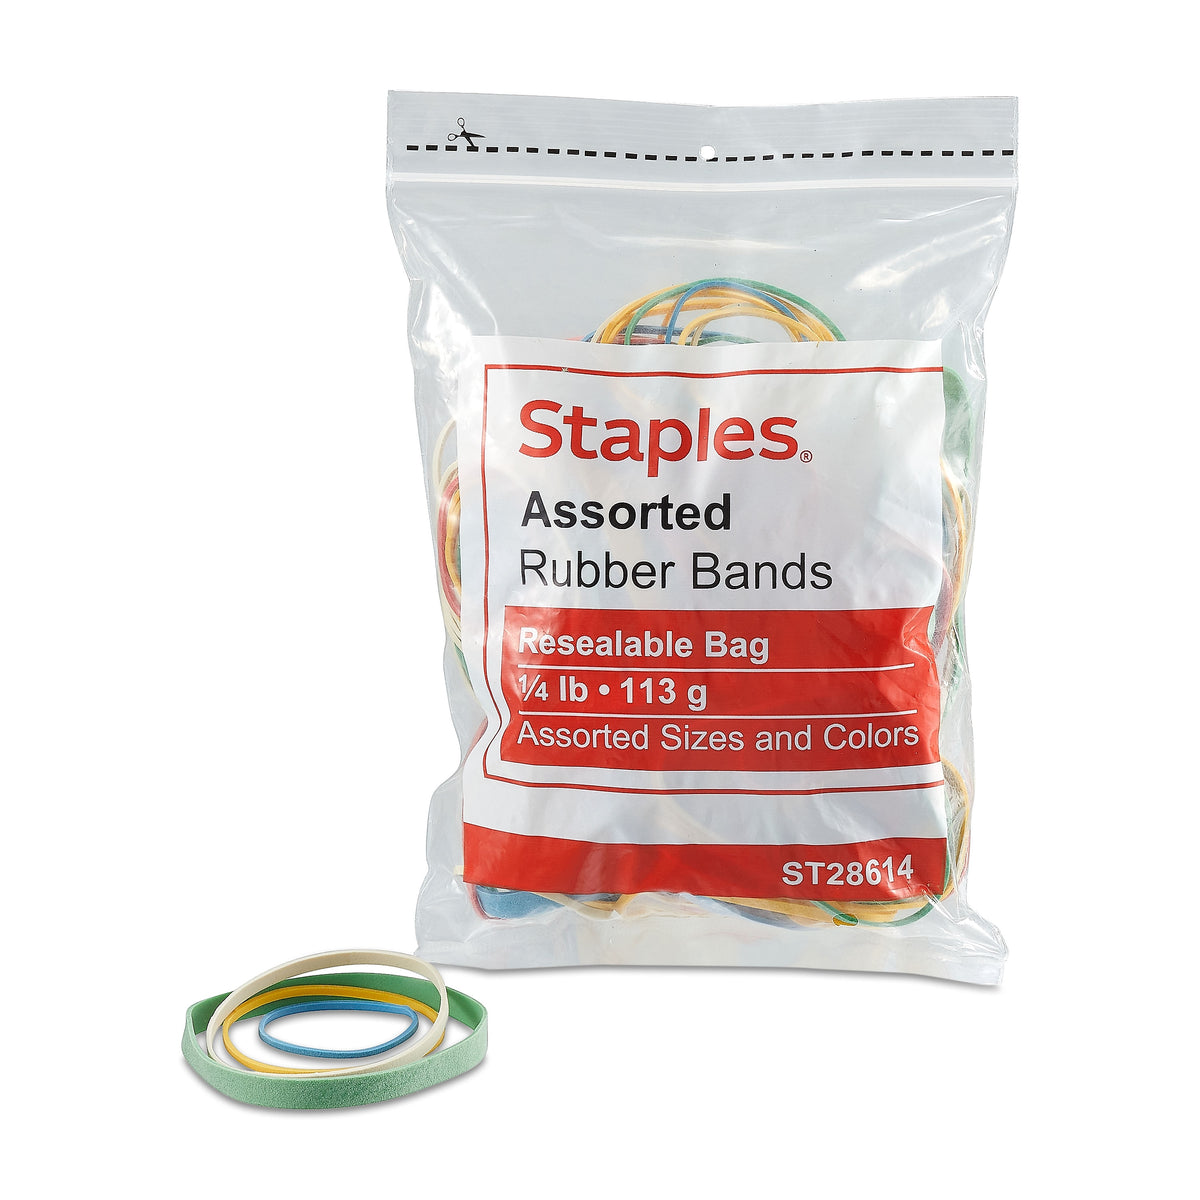 Staples Economy Rubber Bands, 1/4 Lb. Resealable Bag, 200/Pack